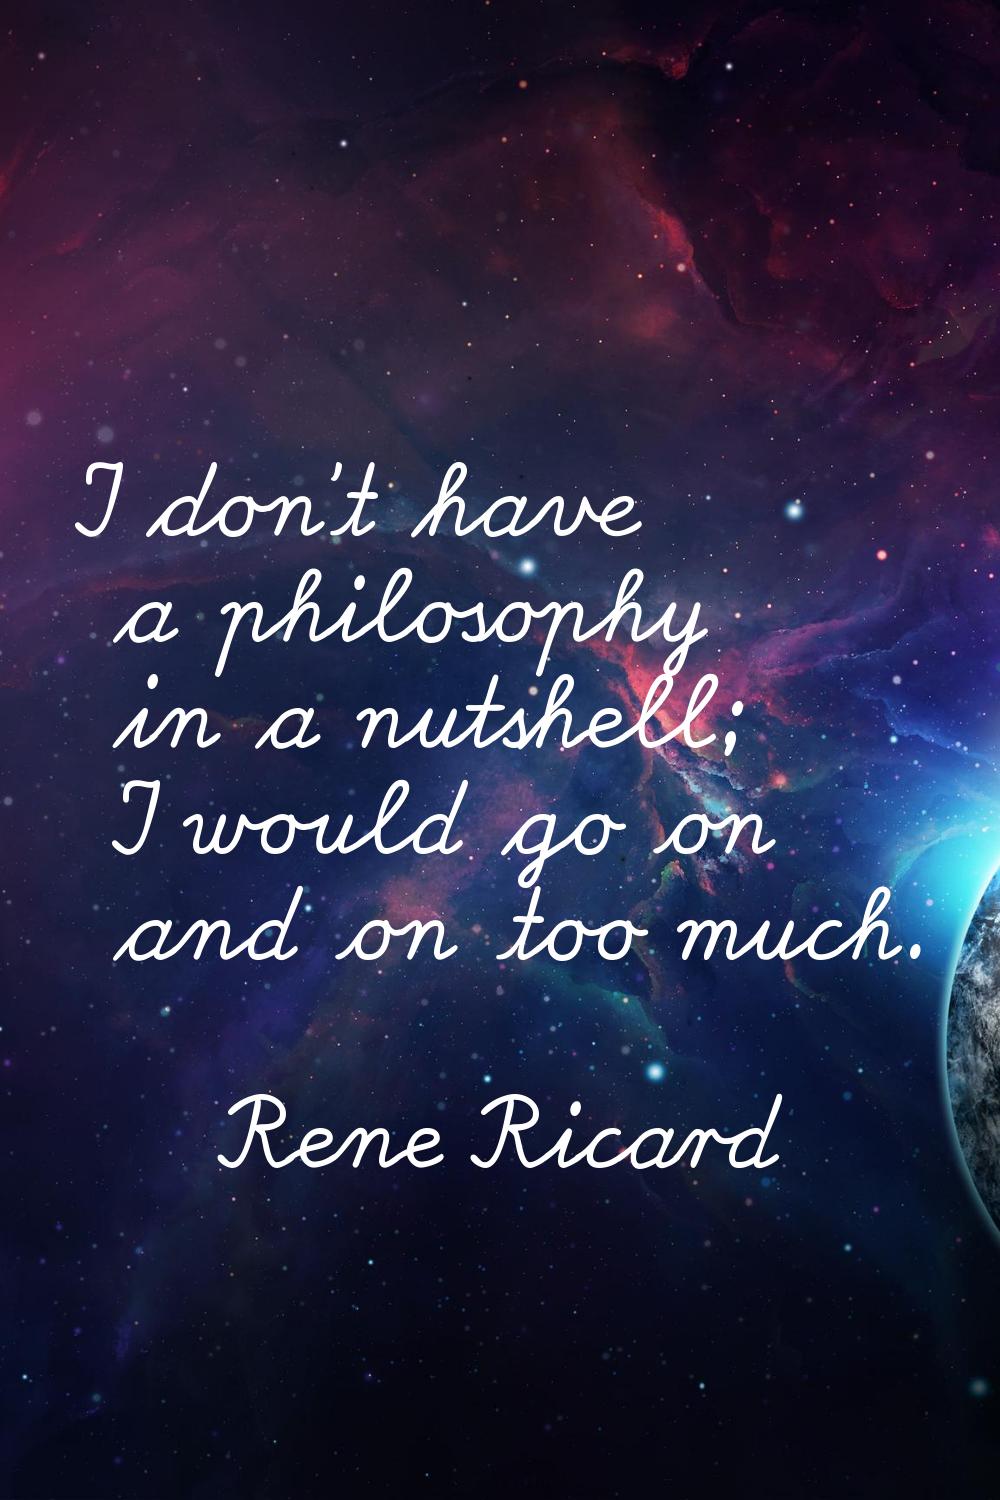 I don't have a philosophy in a nutshell; I would go on and on too much.